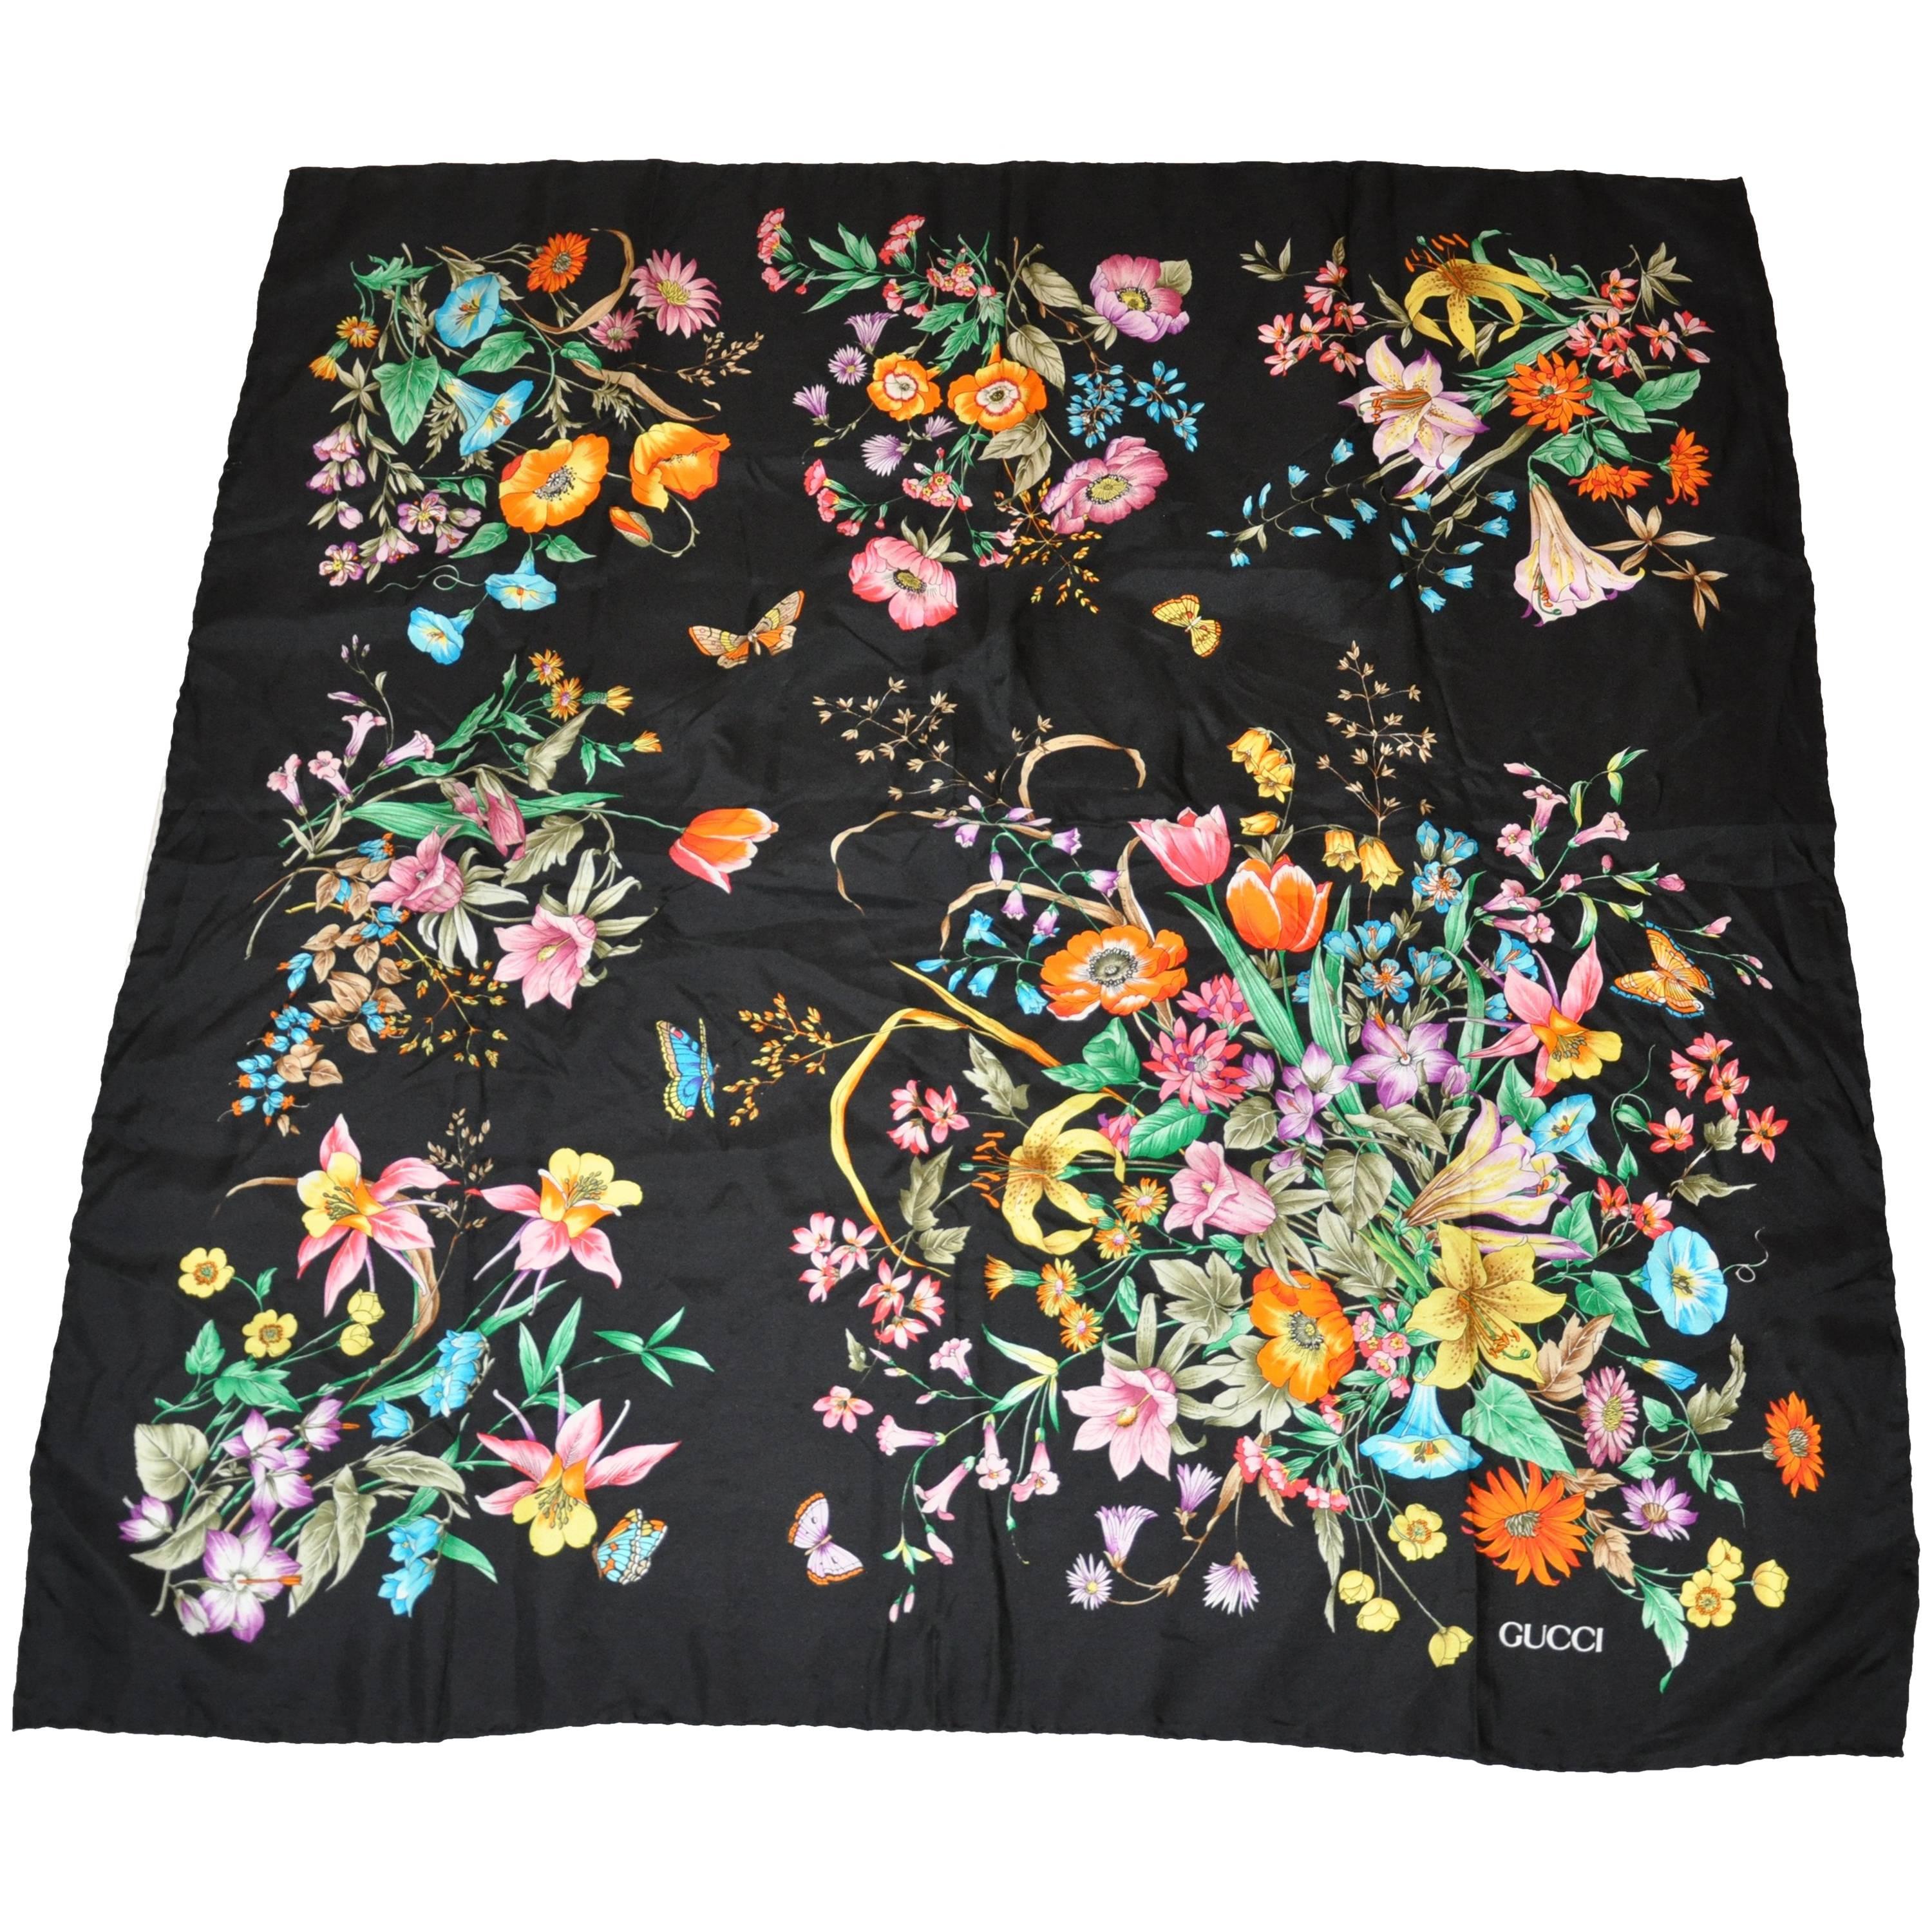 Gucci Signature Black "Collections of Floral Silk Jacquard Scarf